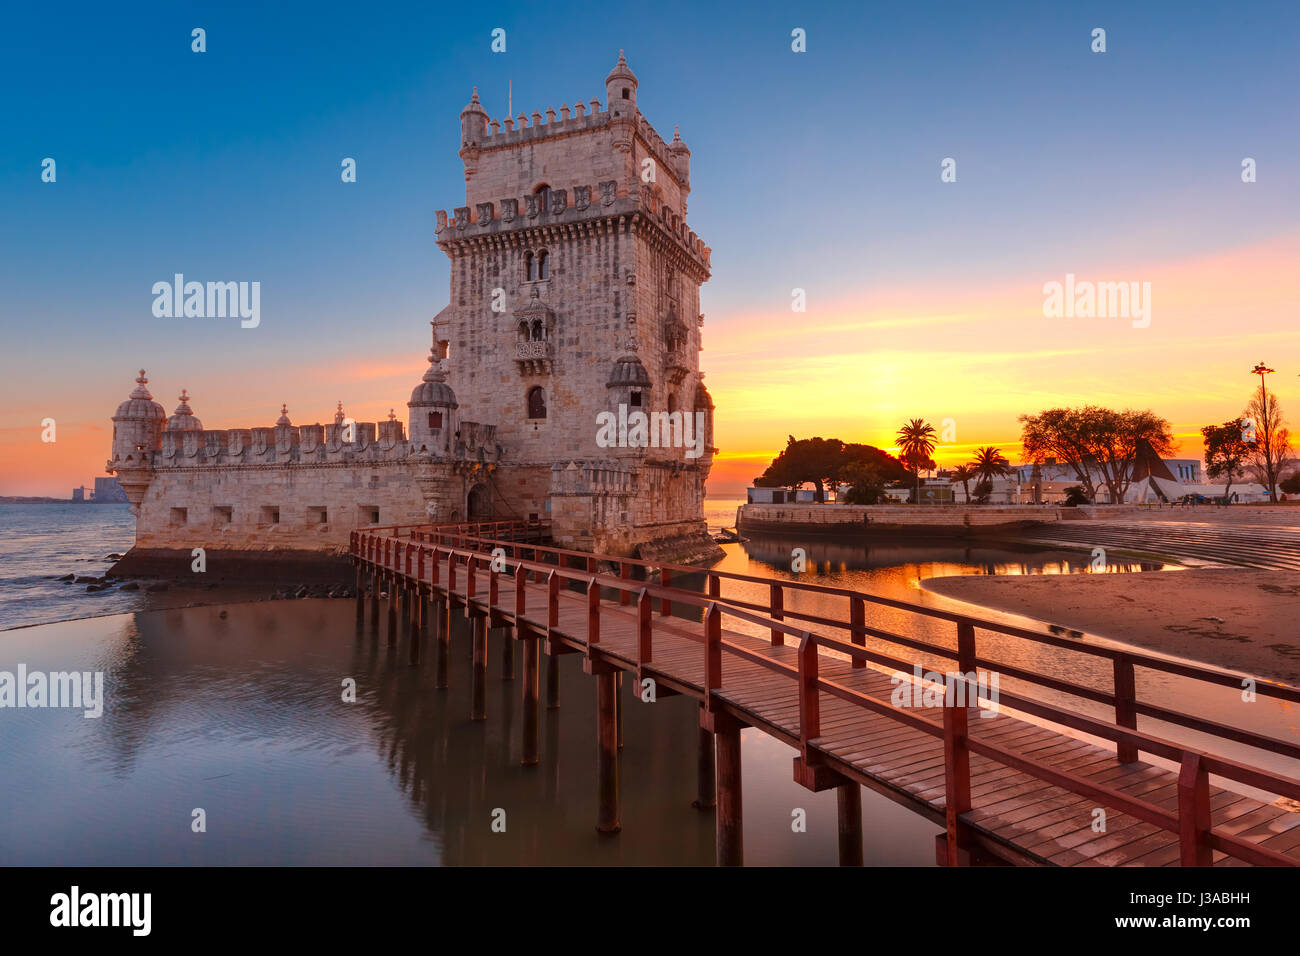 Belem Tower in Lisbon at sunset, Portugal Stock Photo